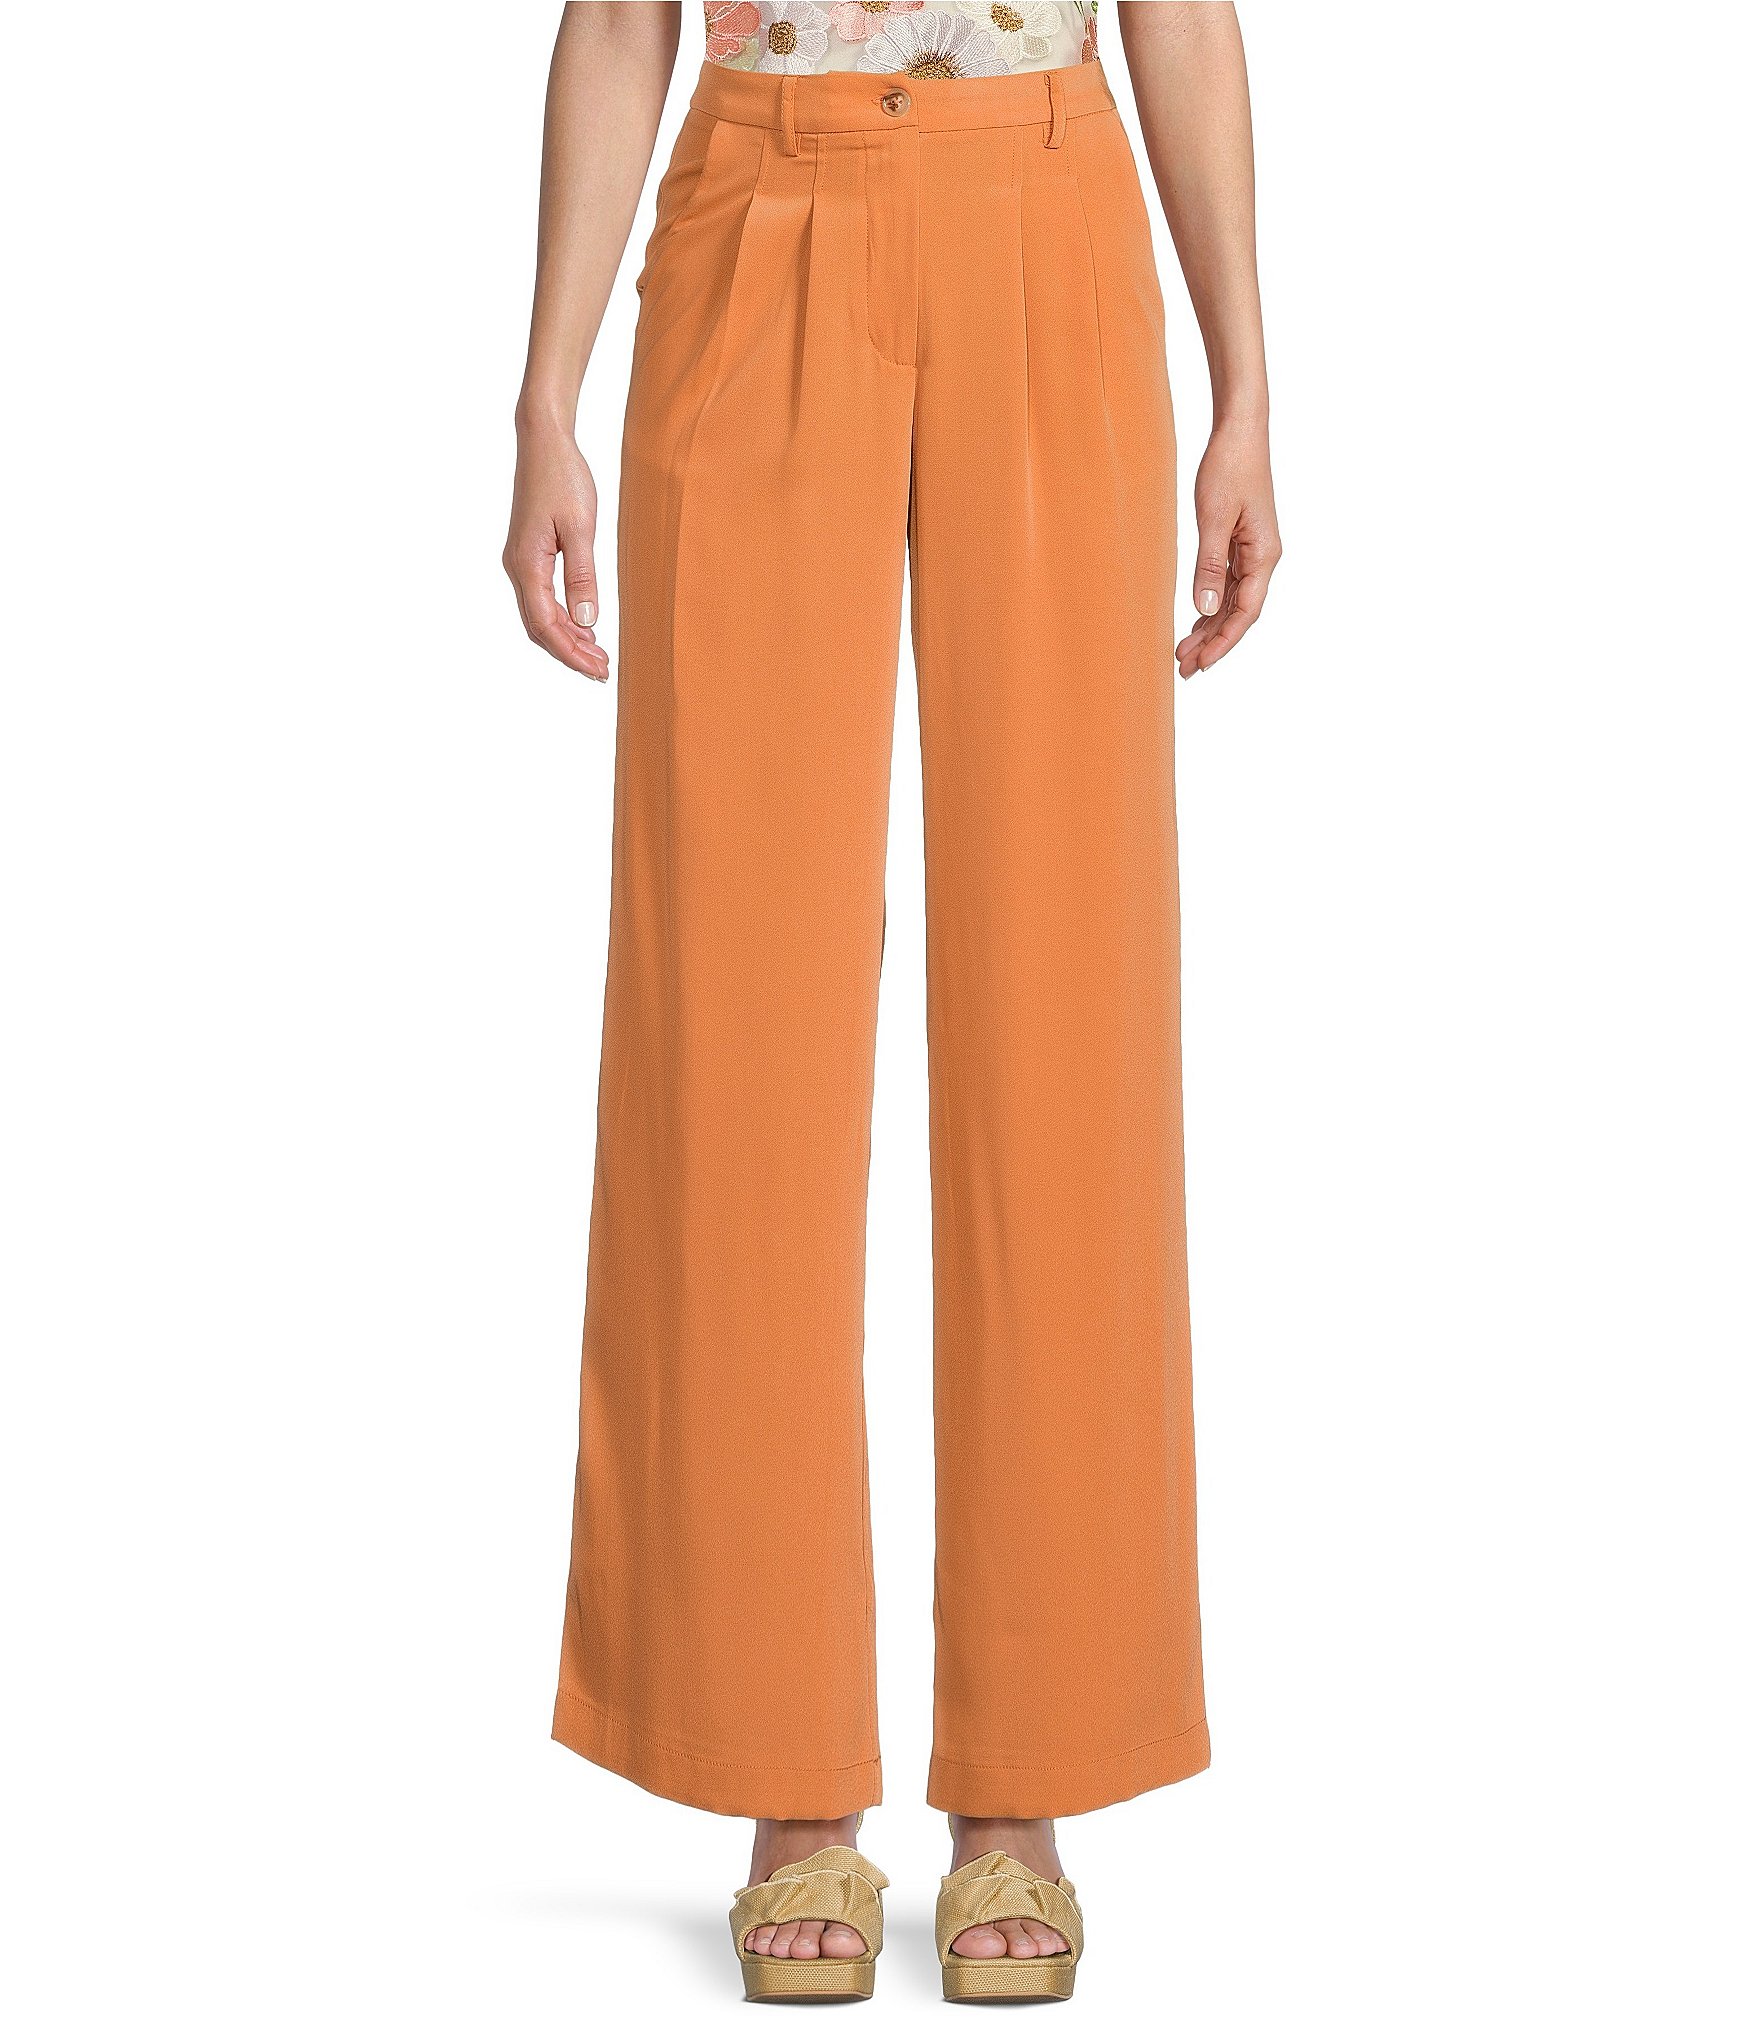 Cupio Solid Crushed Velvet Flat Front Wide Leg Pull-On Pant